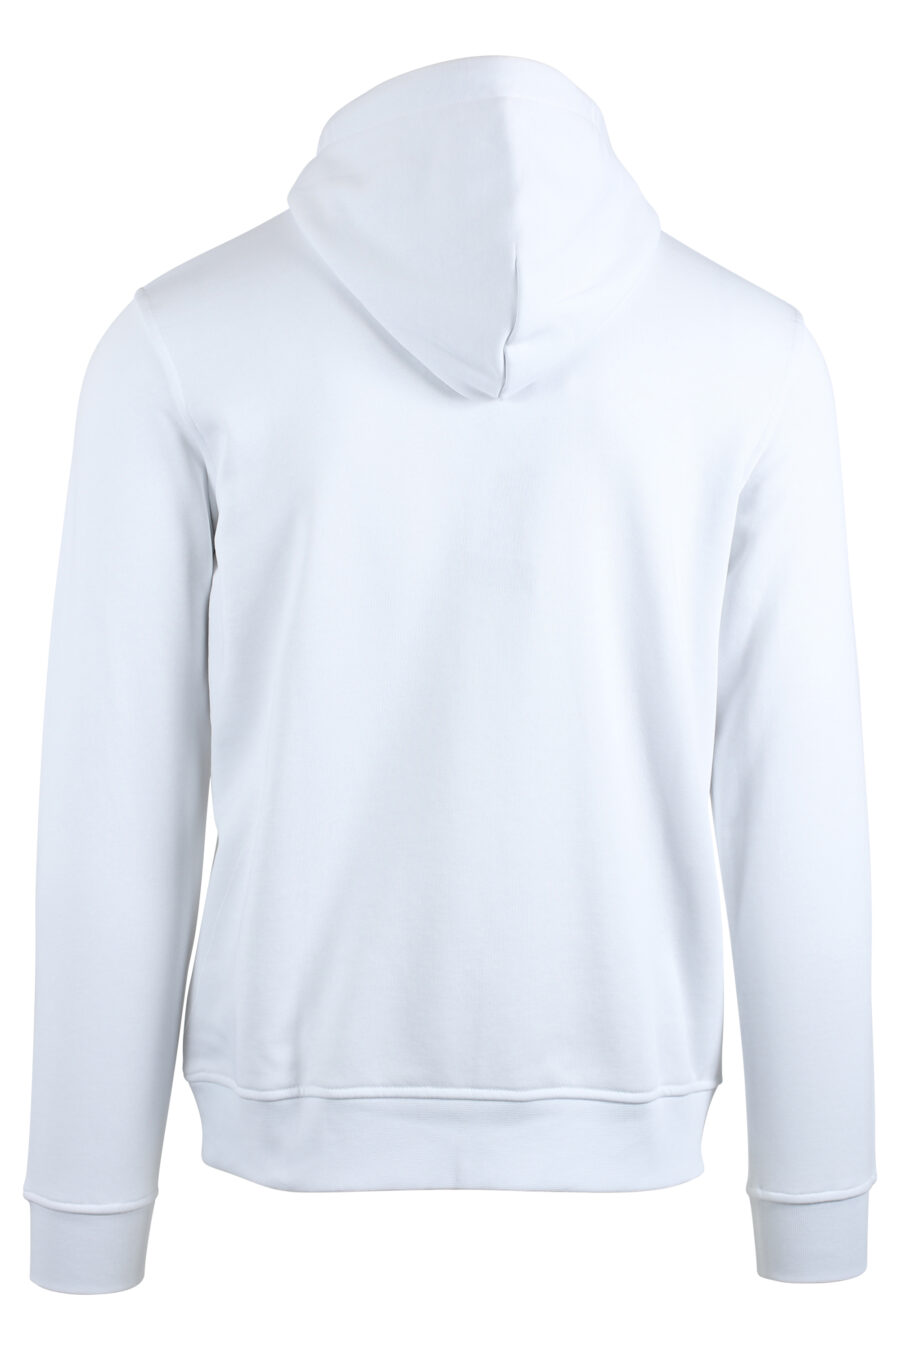 White hooded sweatshirt with white logo patch - IMG 4774